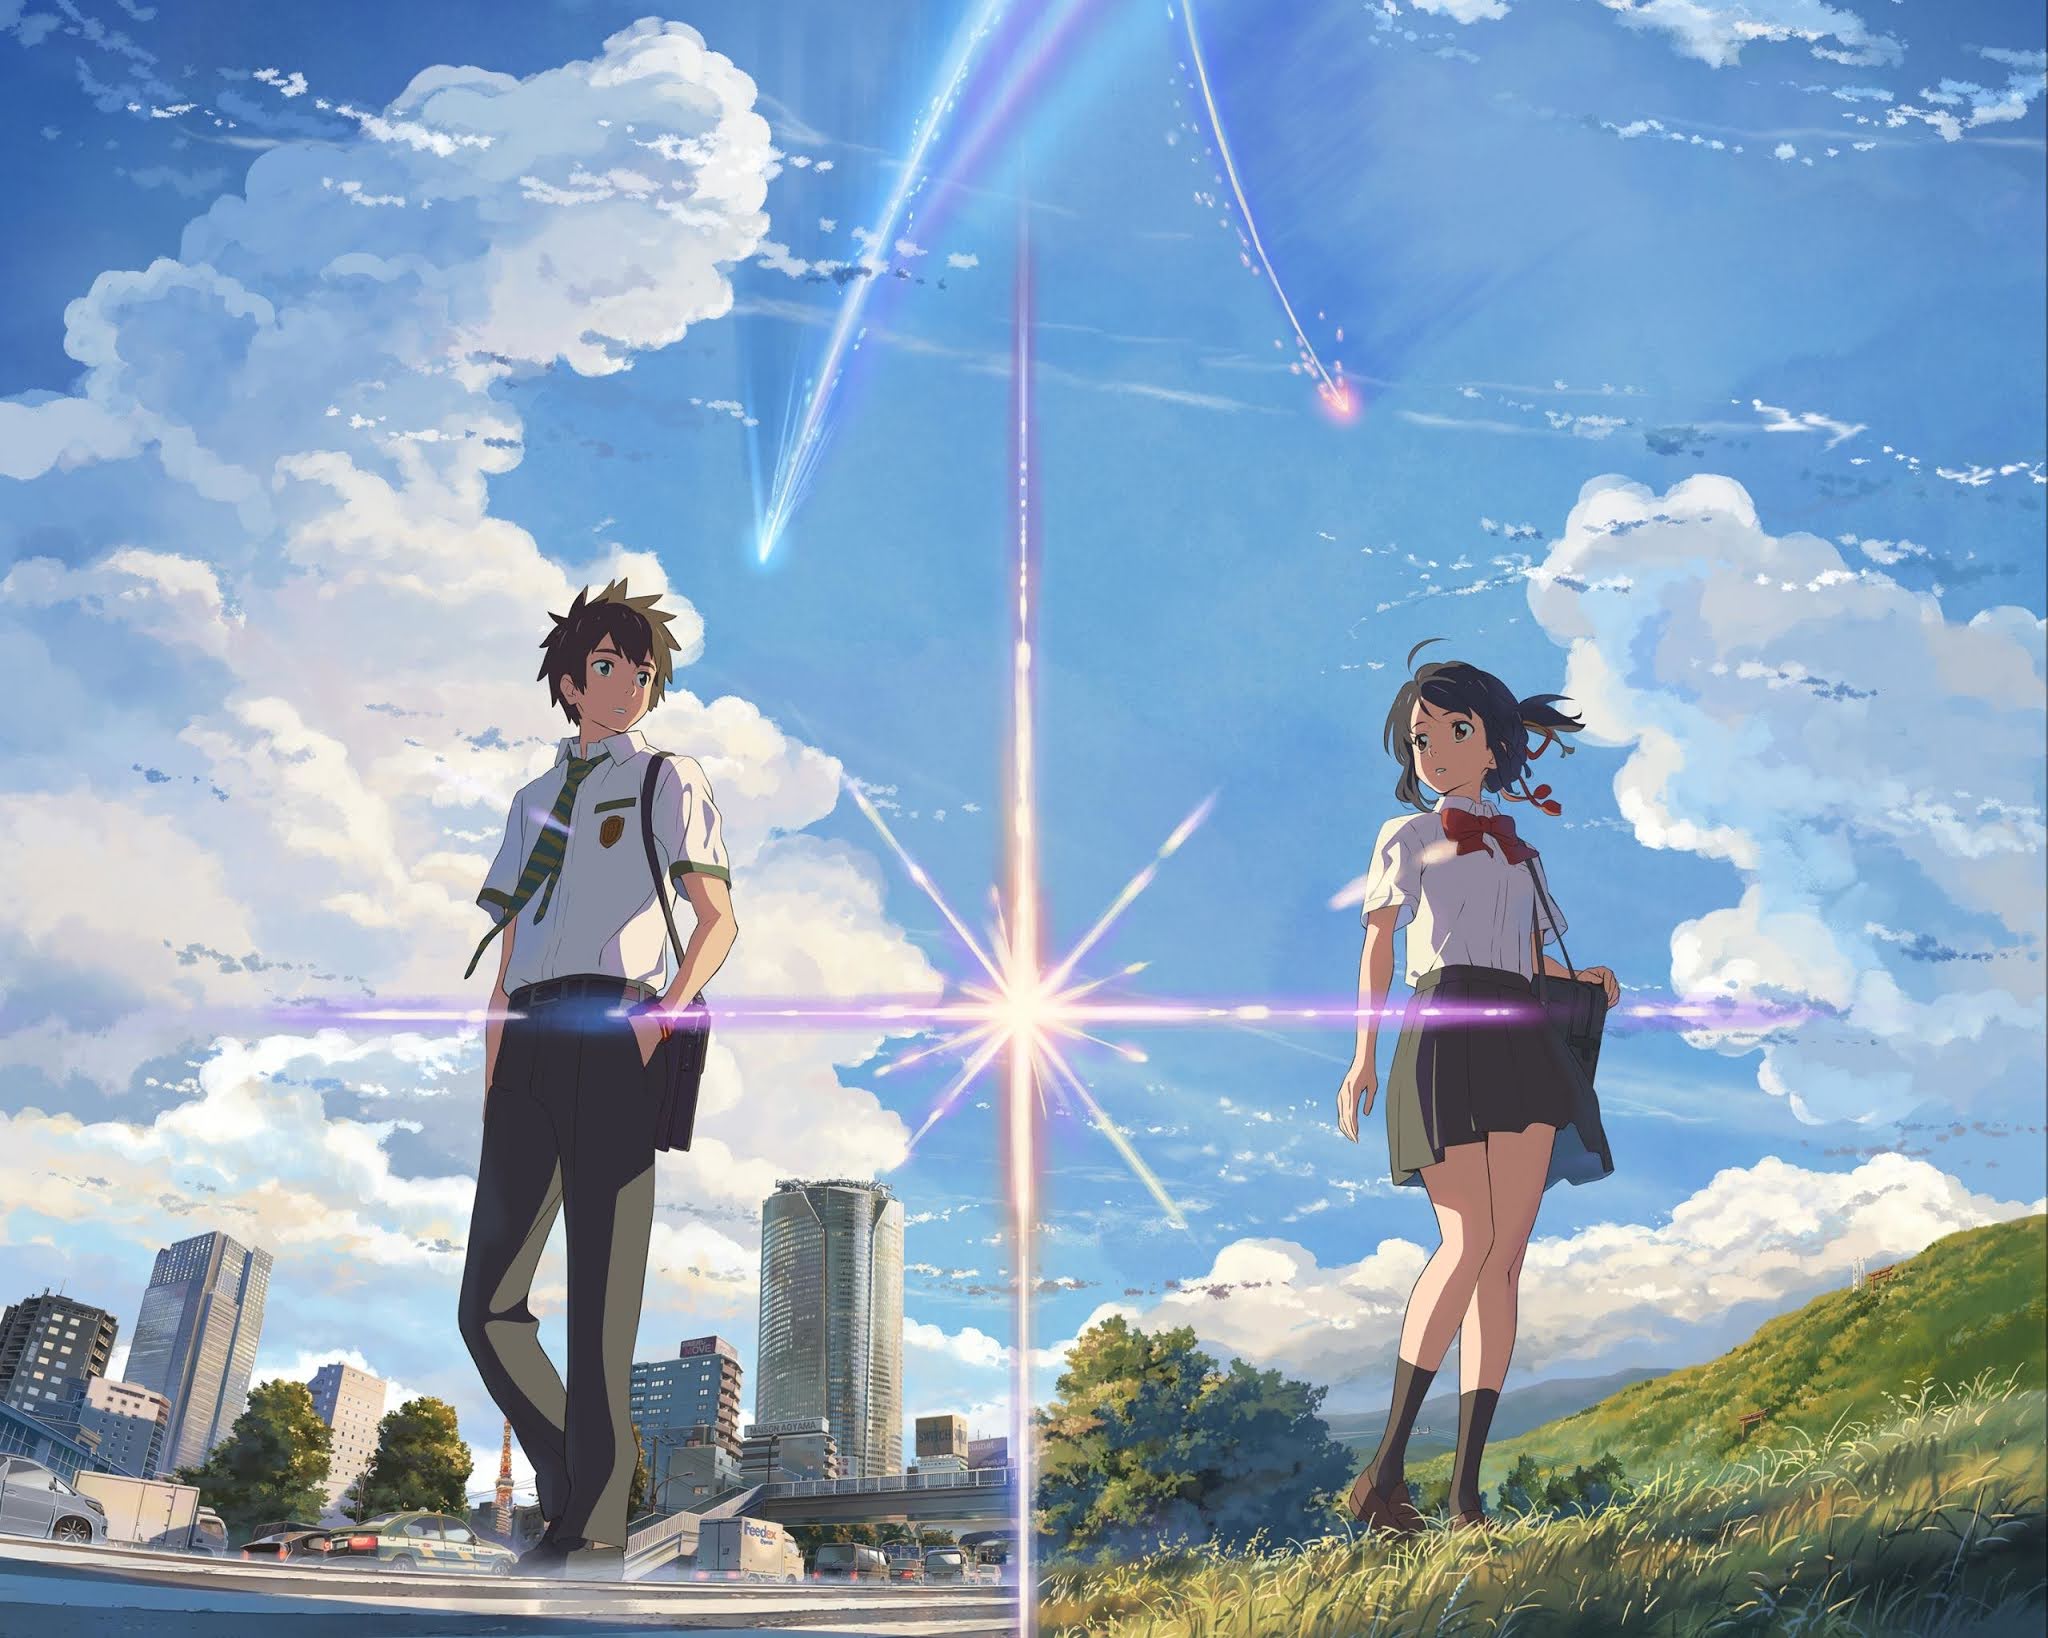 Anime At Its Best: Your Name